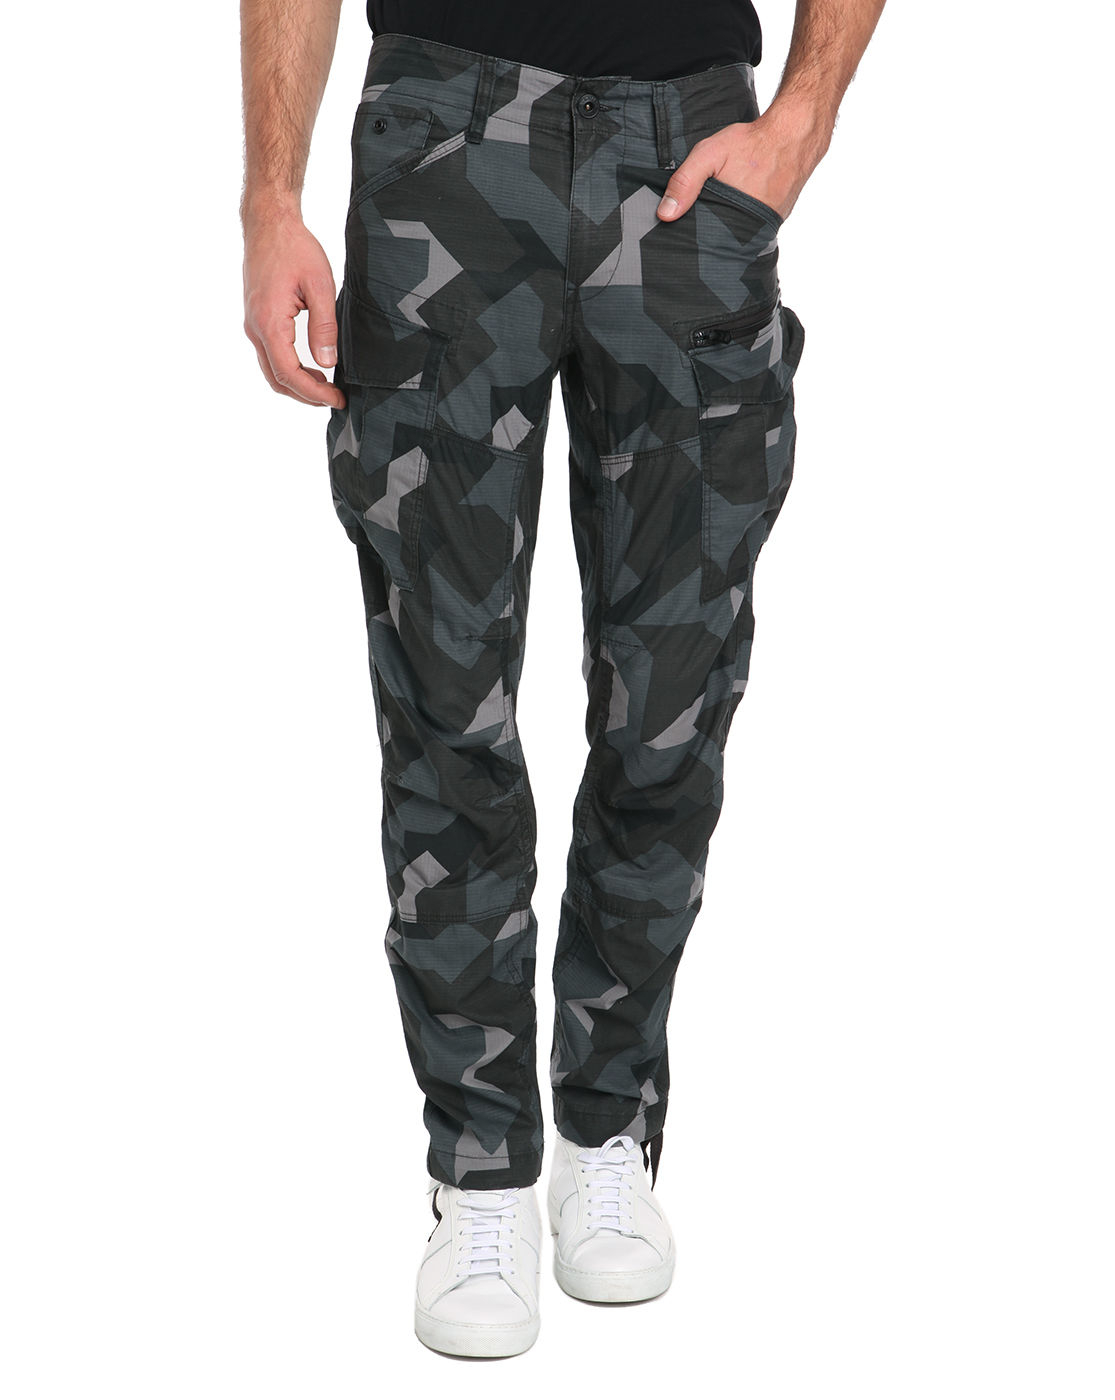 G-star raw Rovic Zip 3d Tapered Camo Cargo Trousers in Green for Men ...